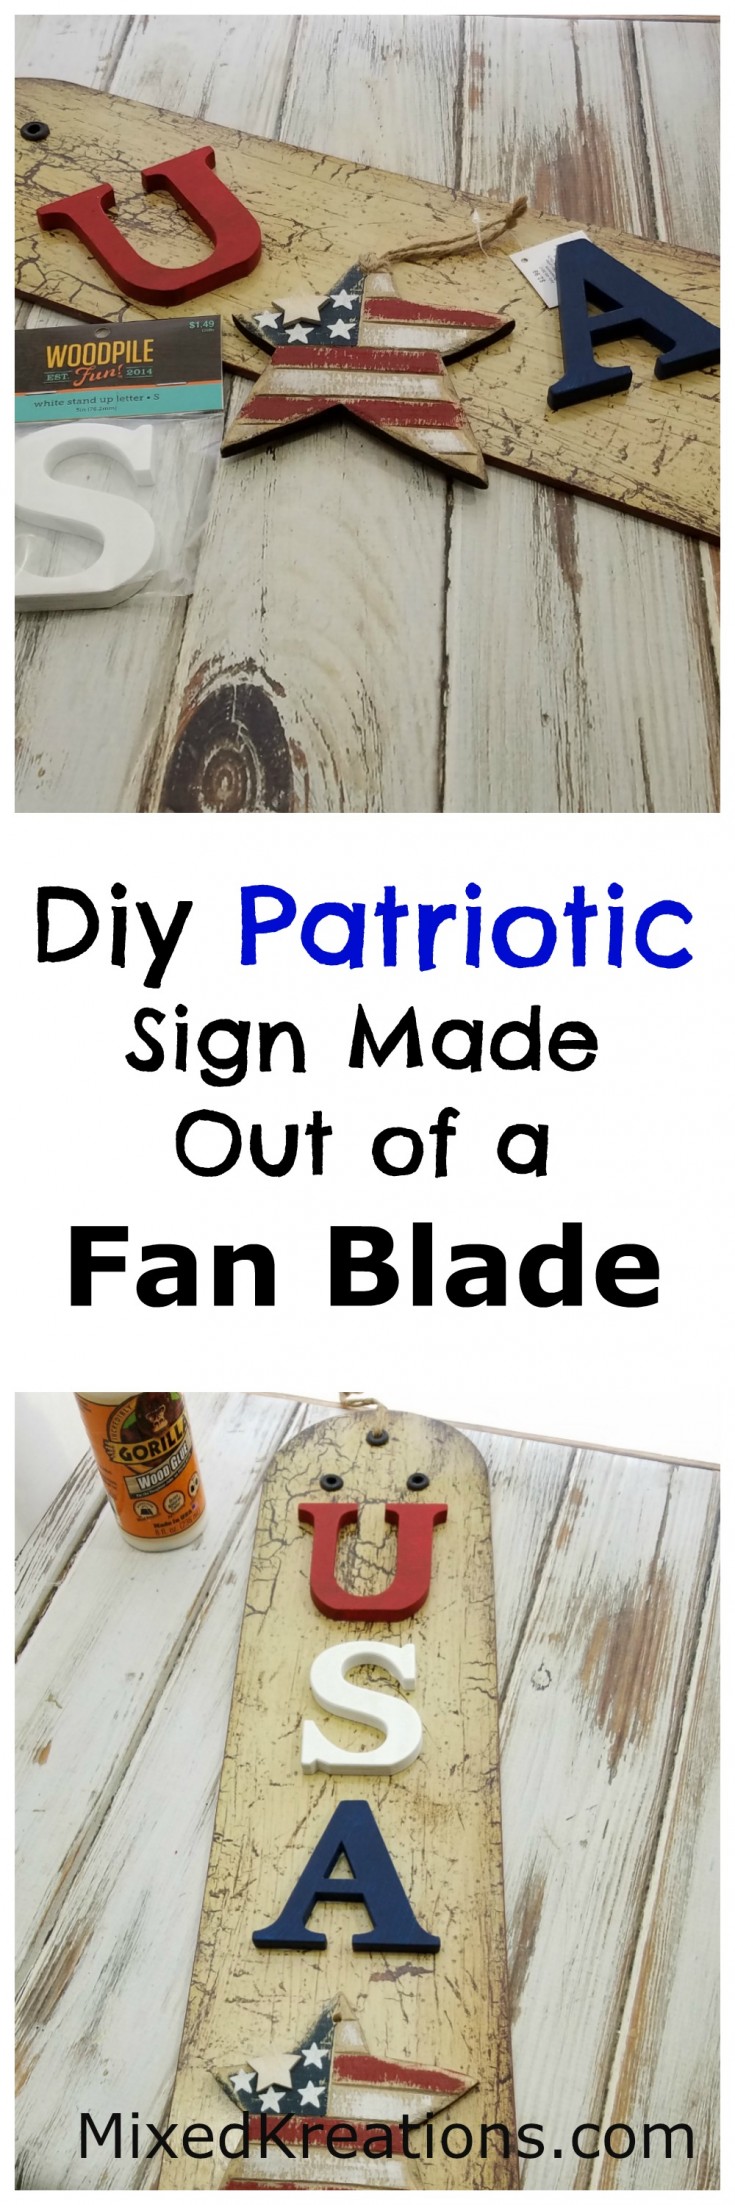 Diy Patriotic Sign Made Out of a Fan Blade 